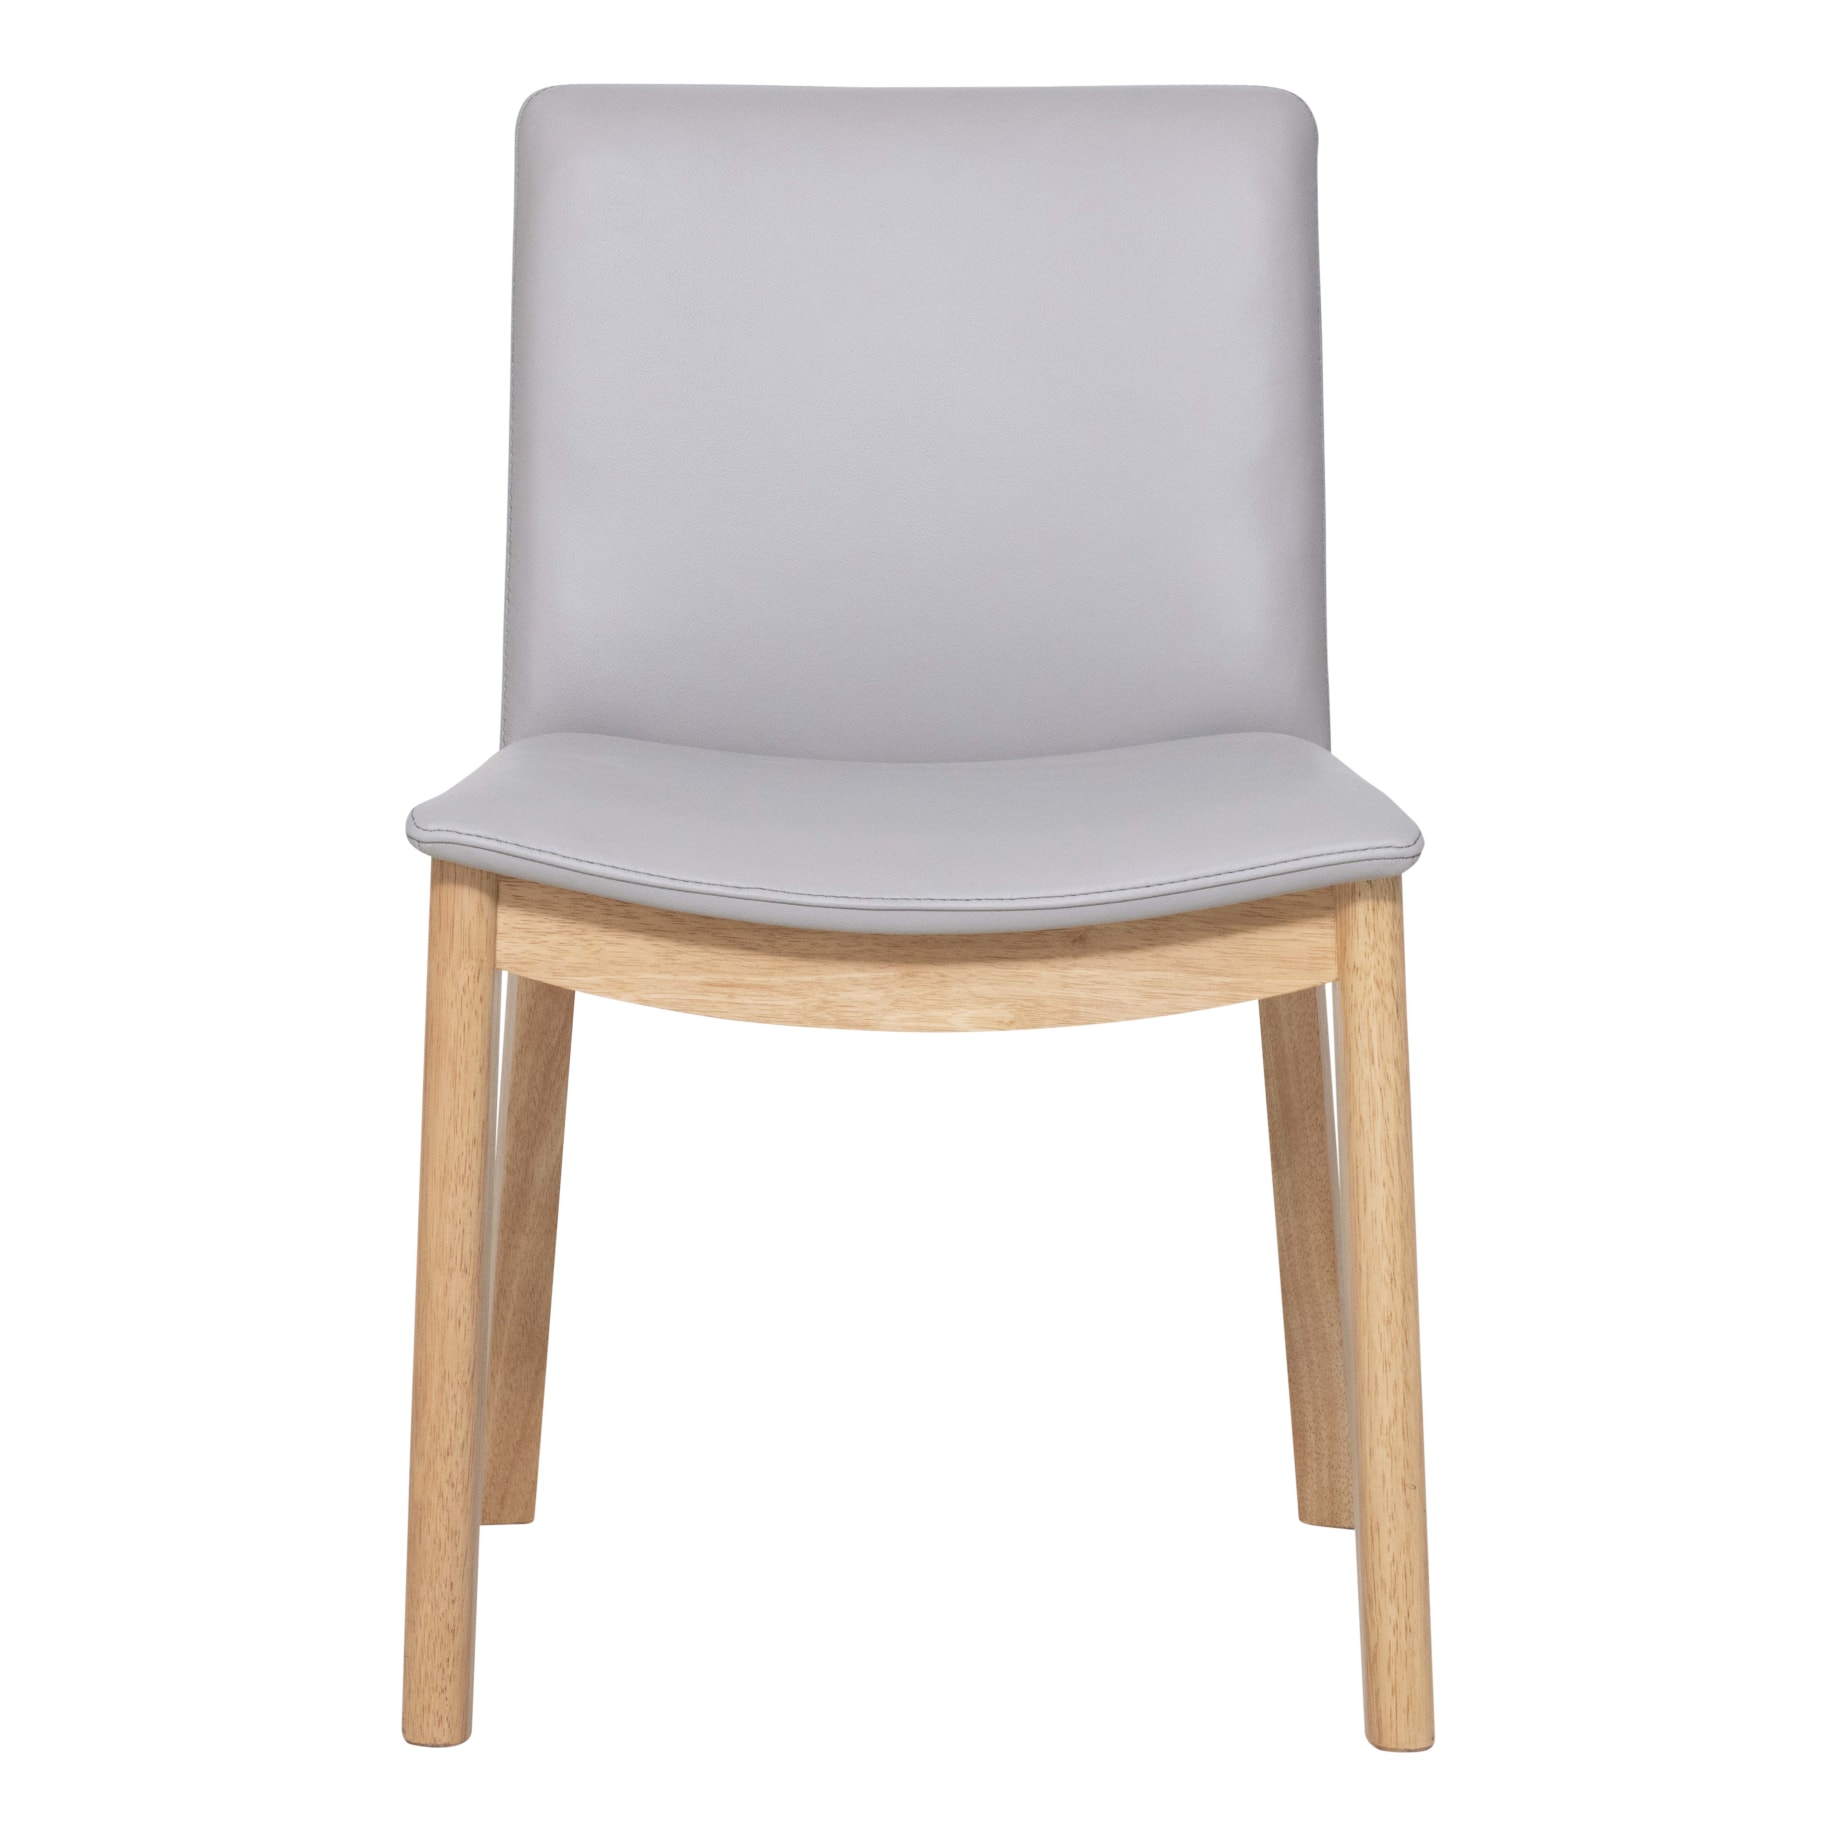 Everest Dining Chair in Pewter Leather / Oak Stain